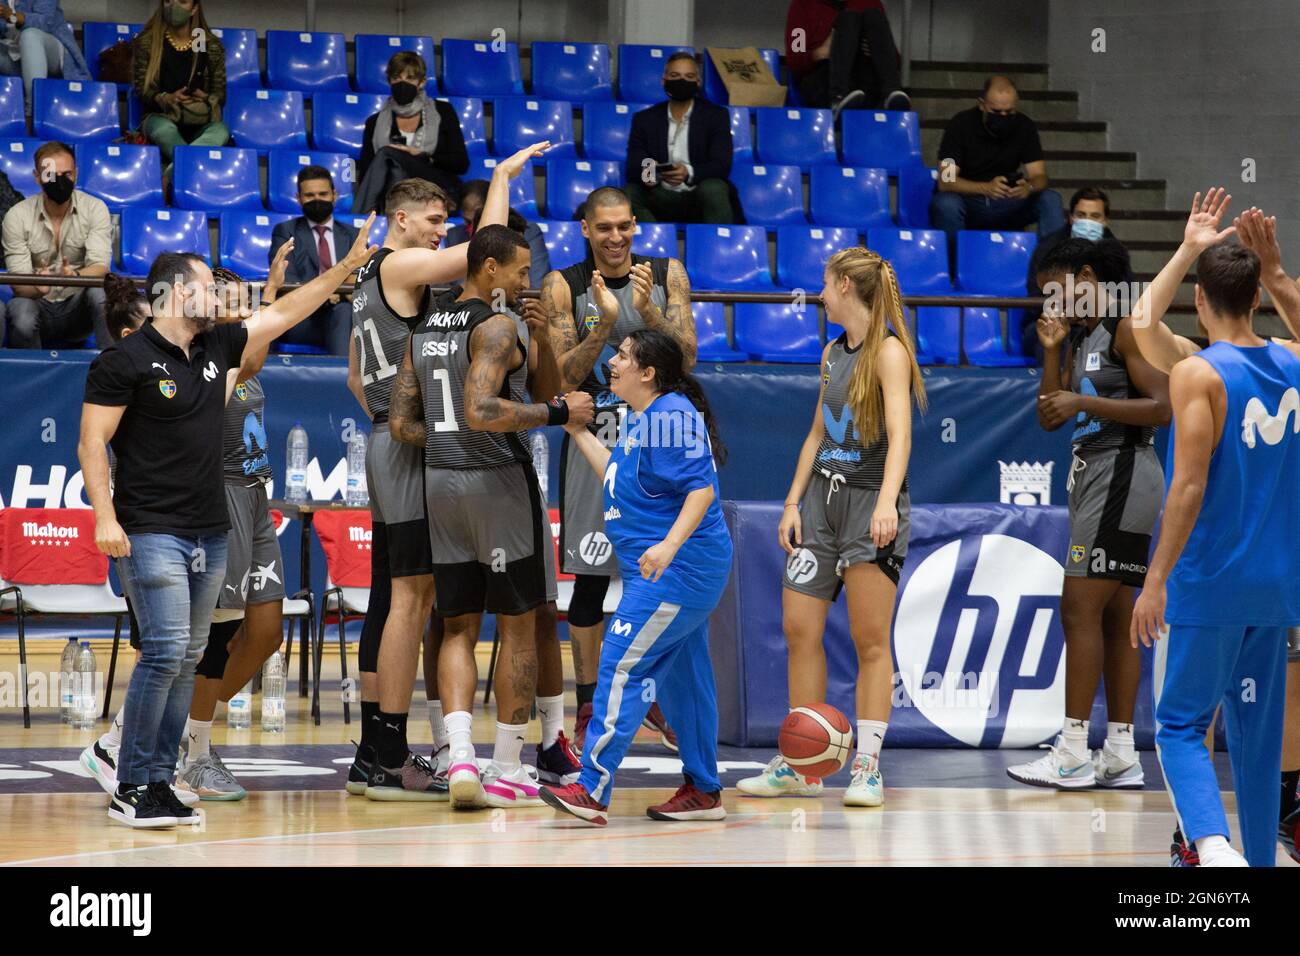 MADRID, Spain. 22nd Sep, 2021. Nora Martins Villarino is congratulated by her teammates from the black team. Credit: Oscar Ribas Torres/Medialys Images/Sipa USA Credit: Sipa USA/Alamy Live News Stock Photo